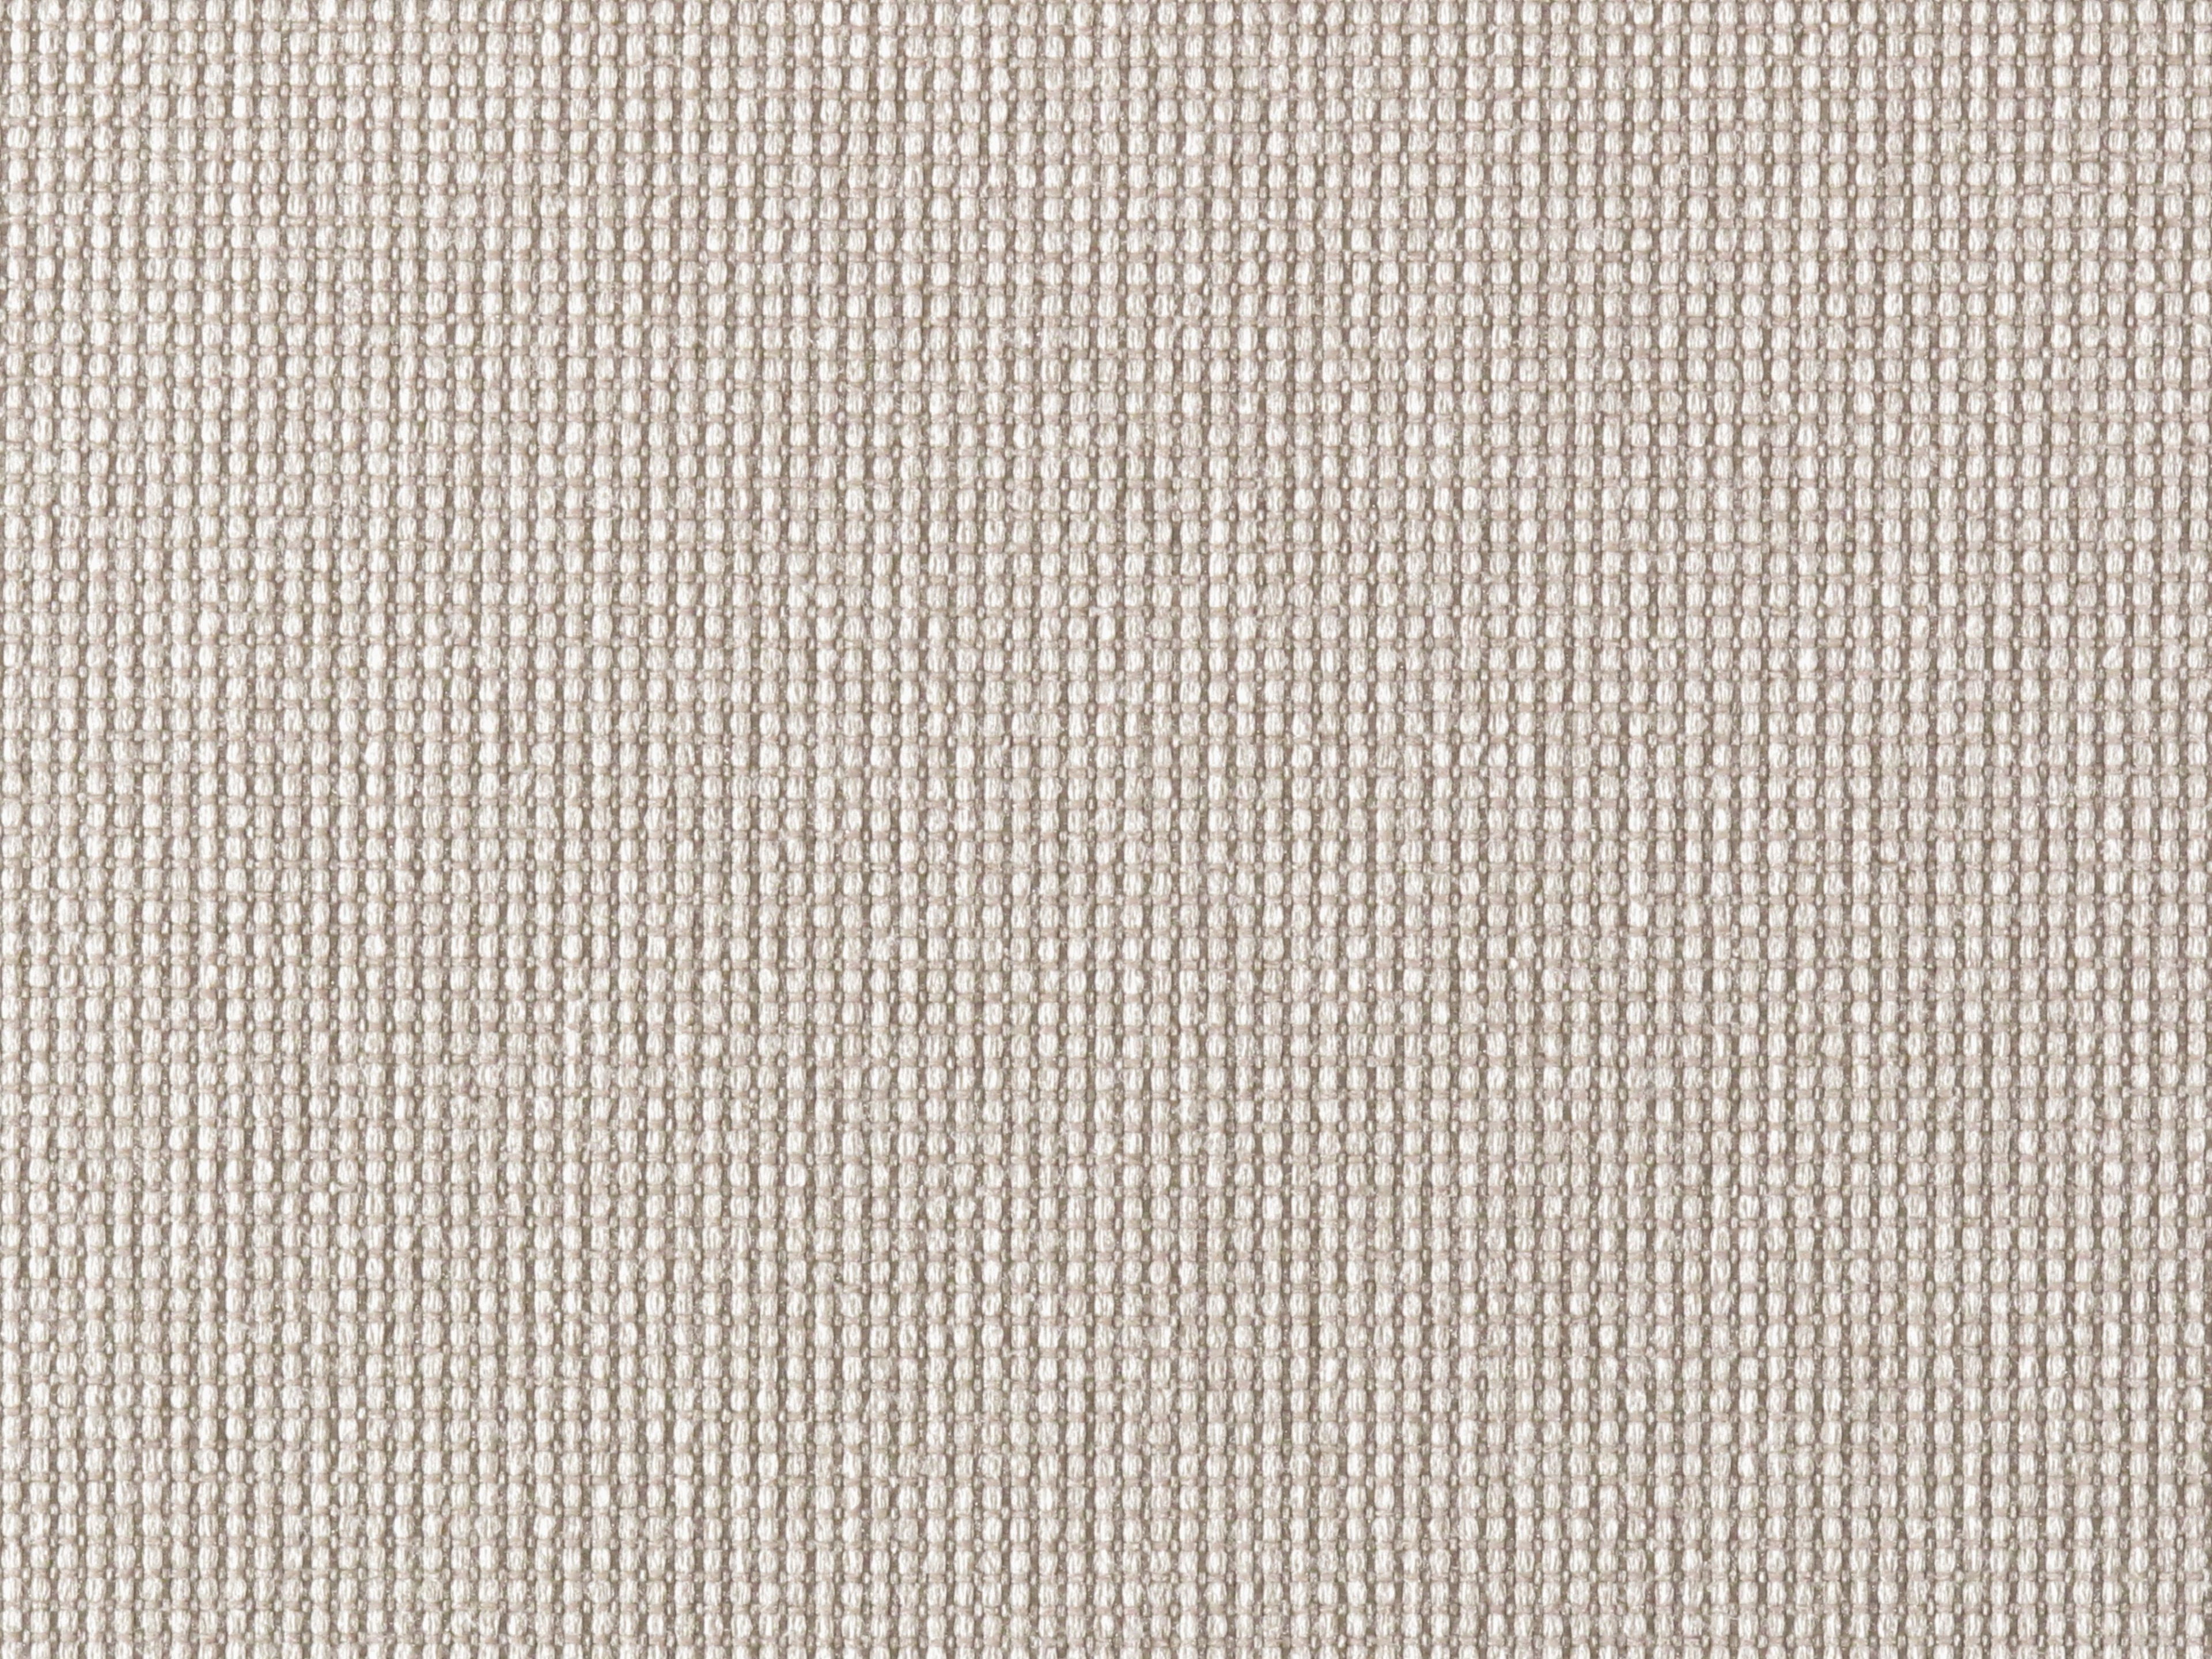 Overland fabric in almond color - pattern number NK 0003A006 - by Scalamandre in the Old World Weavers collection